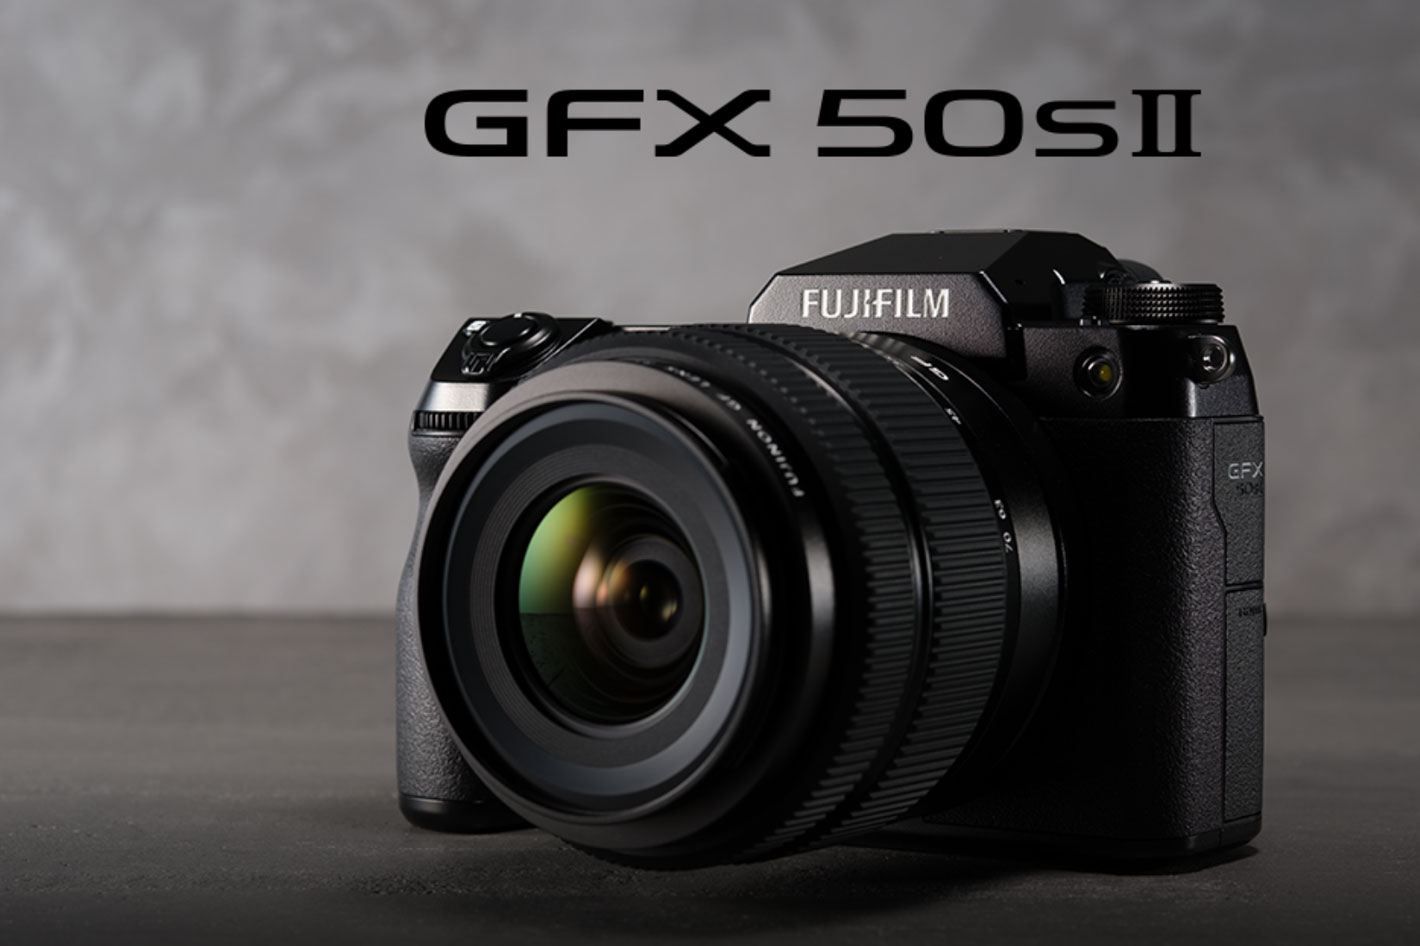 Fujifilm: new GFX50S II camera and new lenses for X and GFX systems